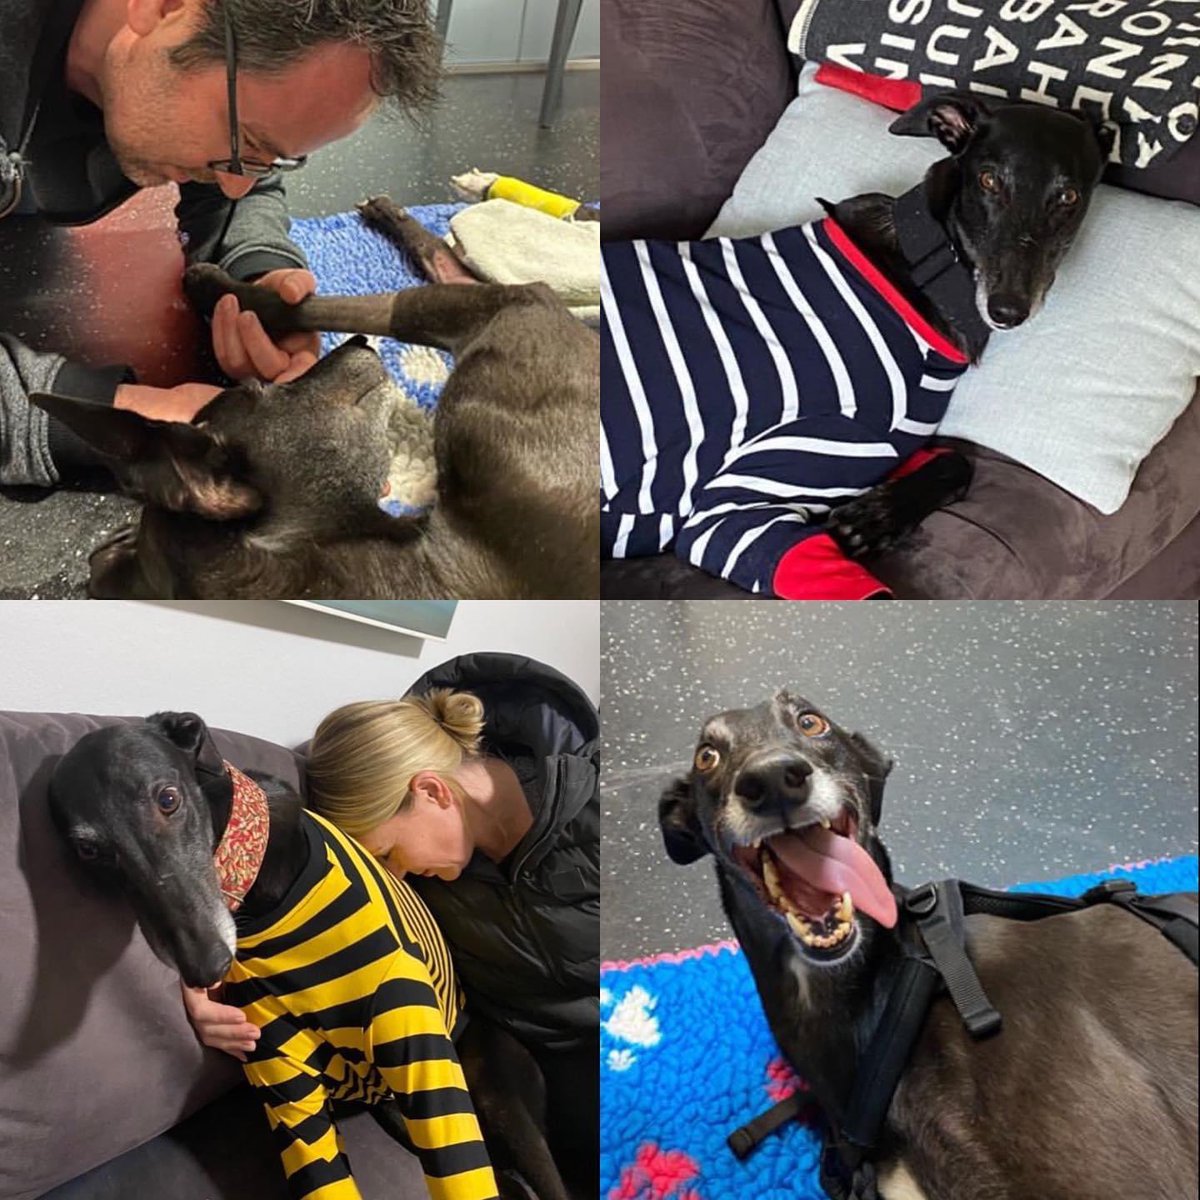 #houndsoftwitter if you need any snazzy new duds, Houndtees is donating all  profits today to Joey, who only just got adopted but has some major health problems. Joey once got a ride in mum’s car to the hairyman and mum says she is a total sweetie. houndtees.com.au